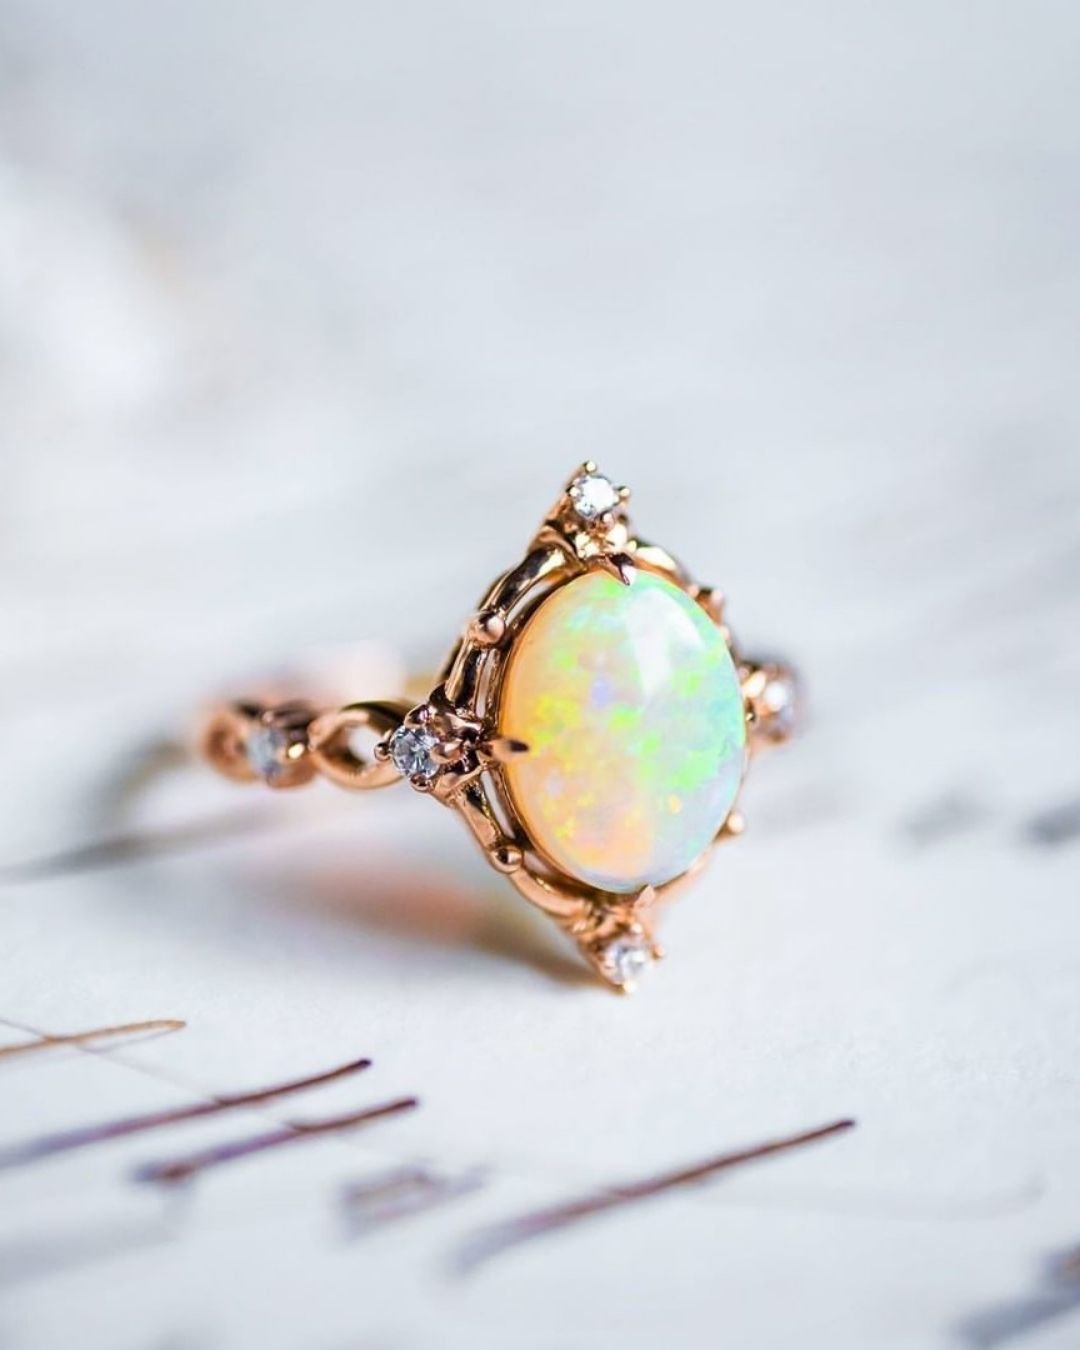 rose gold wedding rings with opal gems2